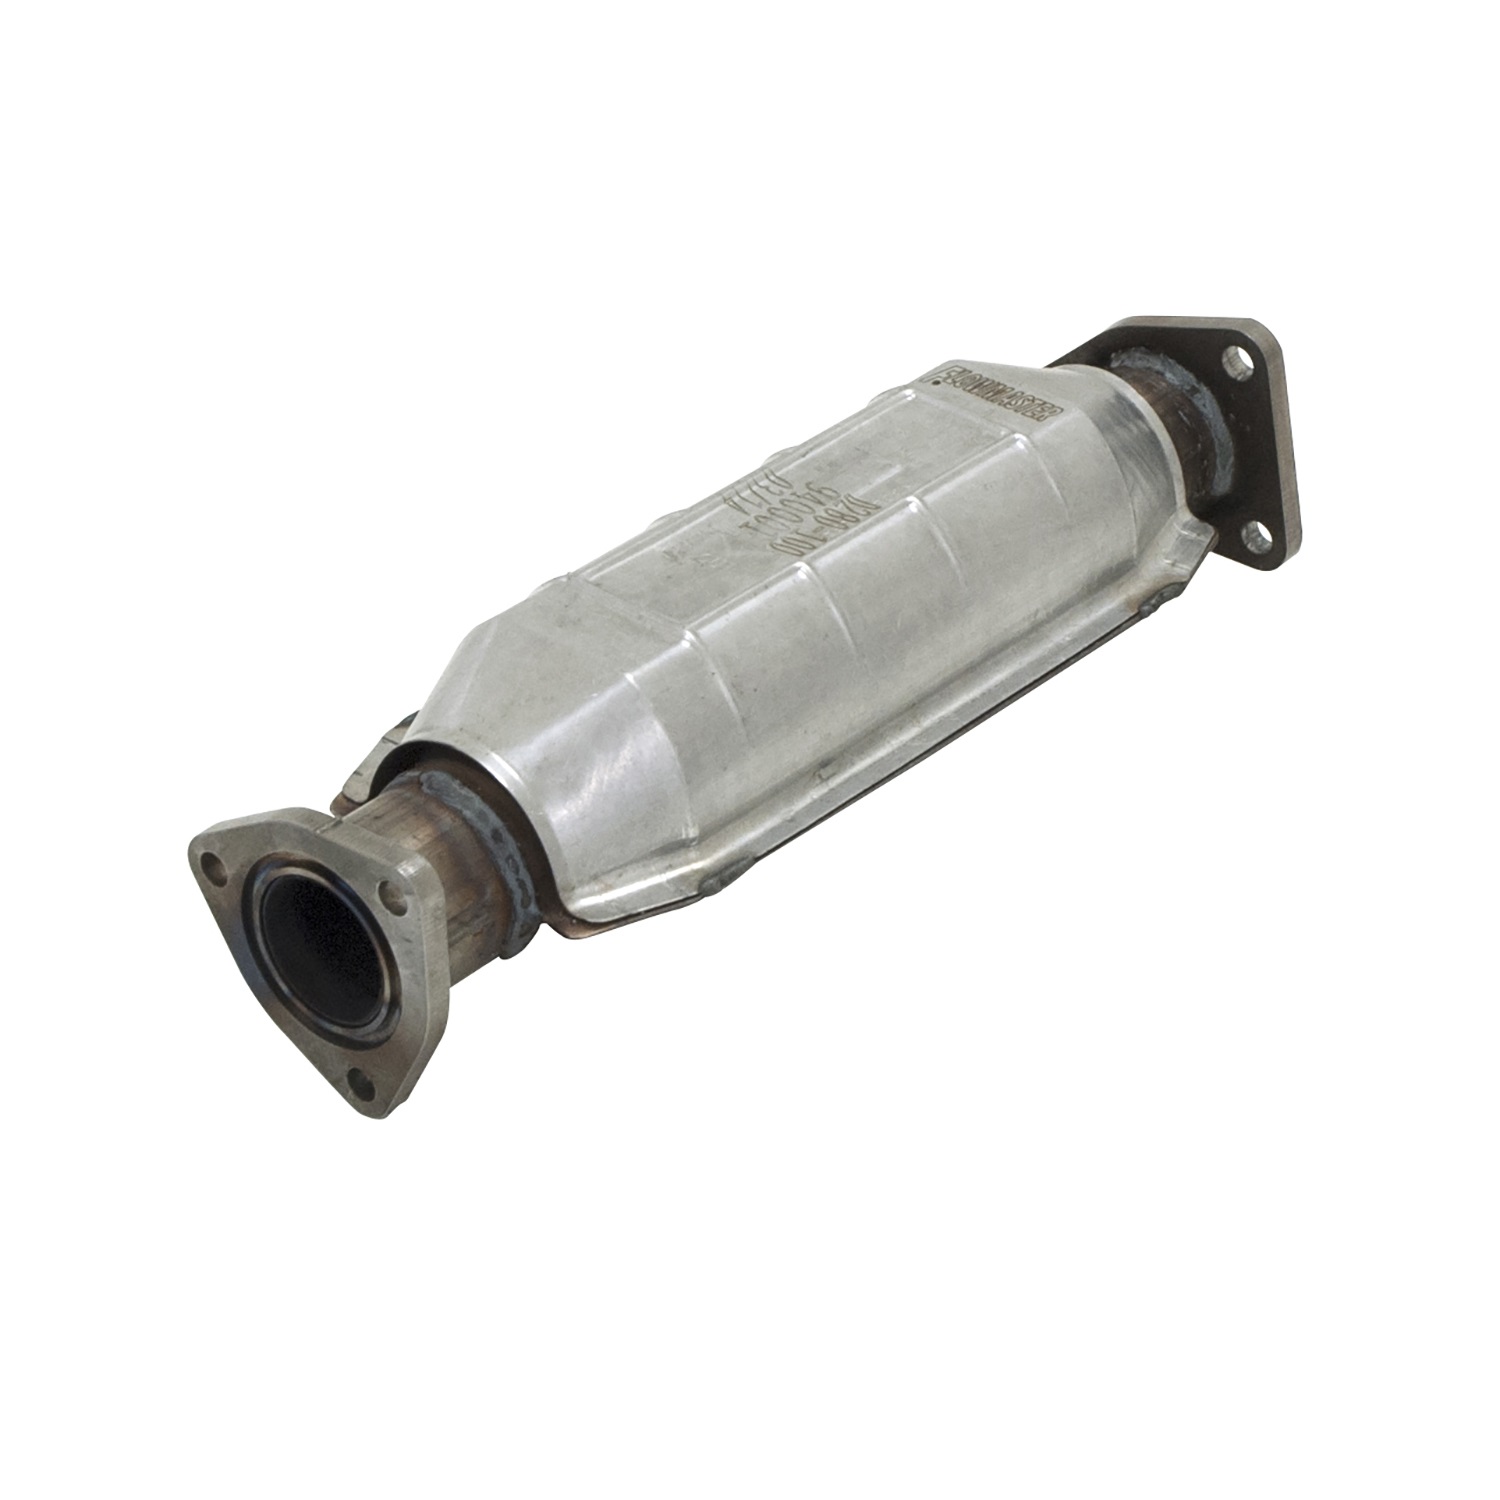 Flowmaster Flowmaster 3060008 Direct Fit Catalytic Converter Fits 00-02 Accord